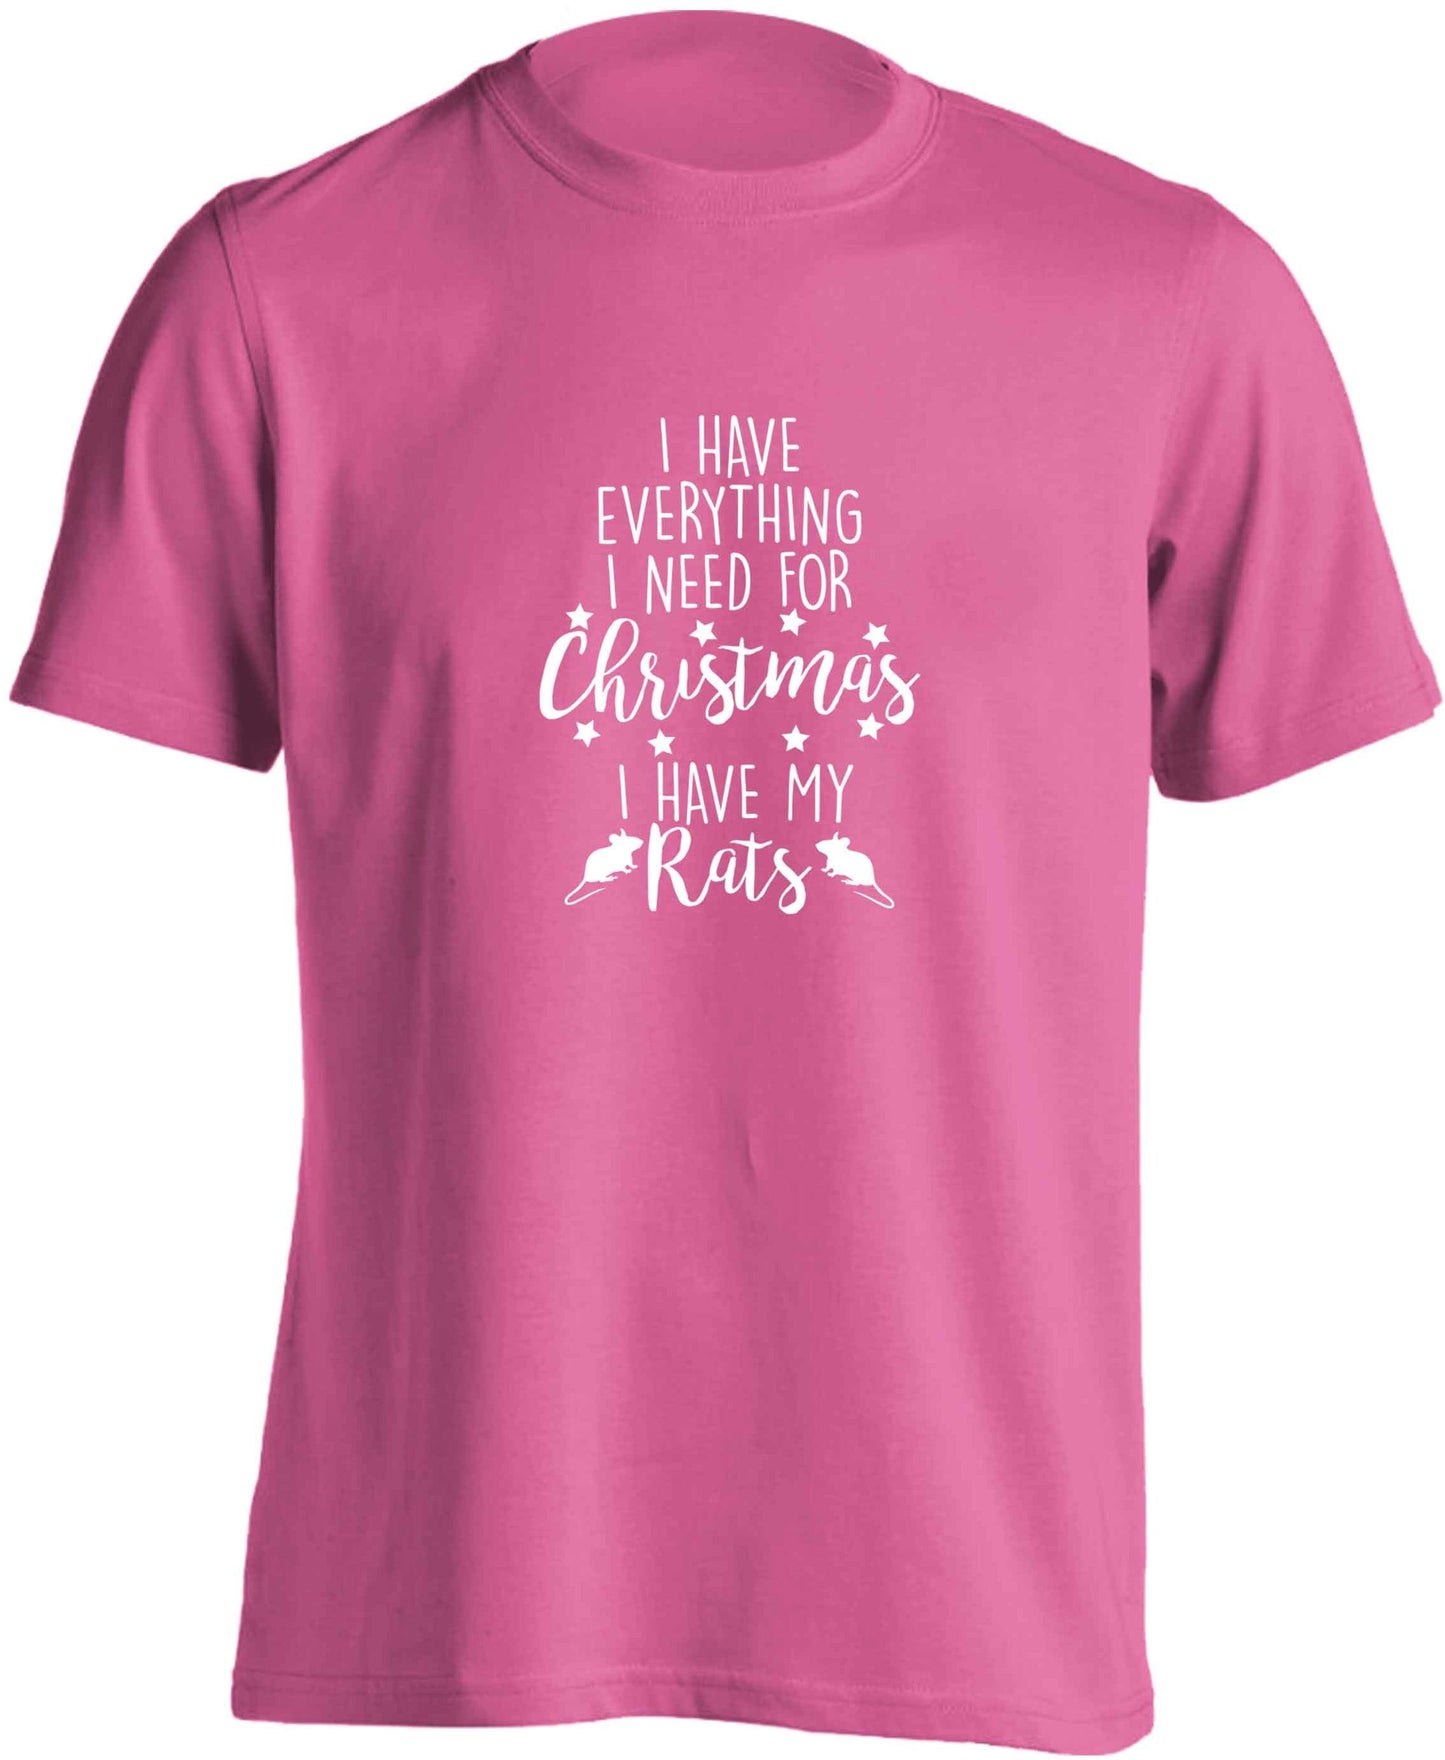 I have everything I need for Christmas I have my rats adults unisex pink Tshirt 2XL